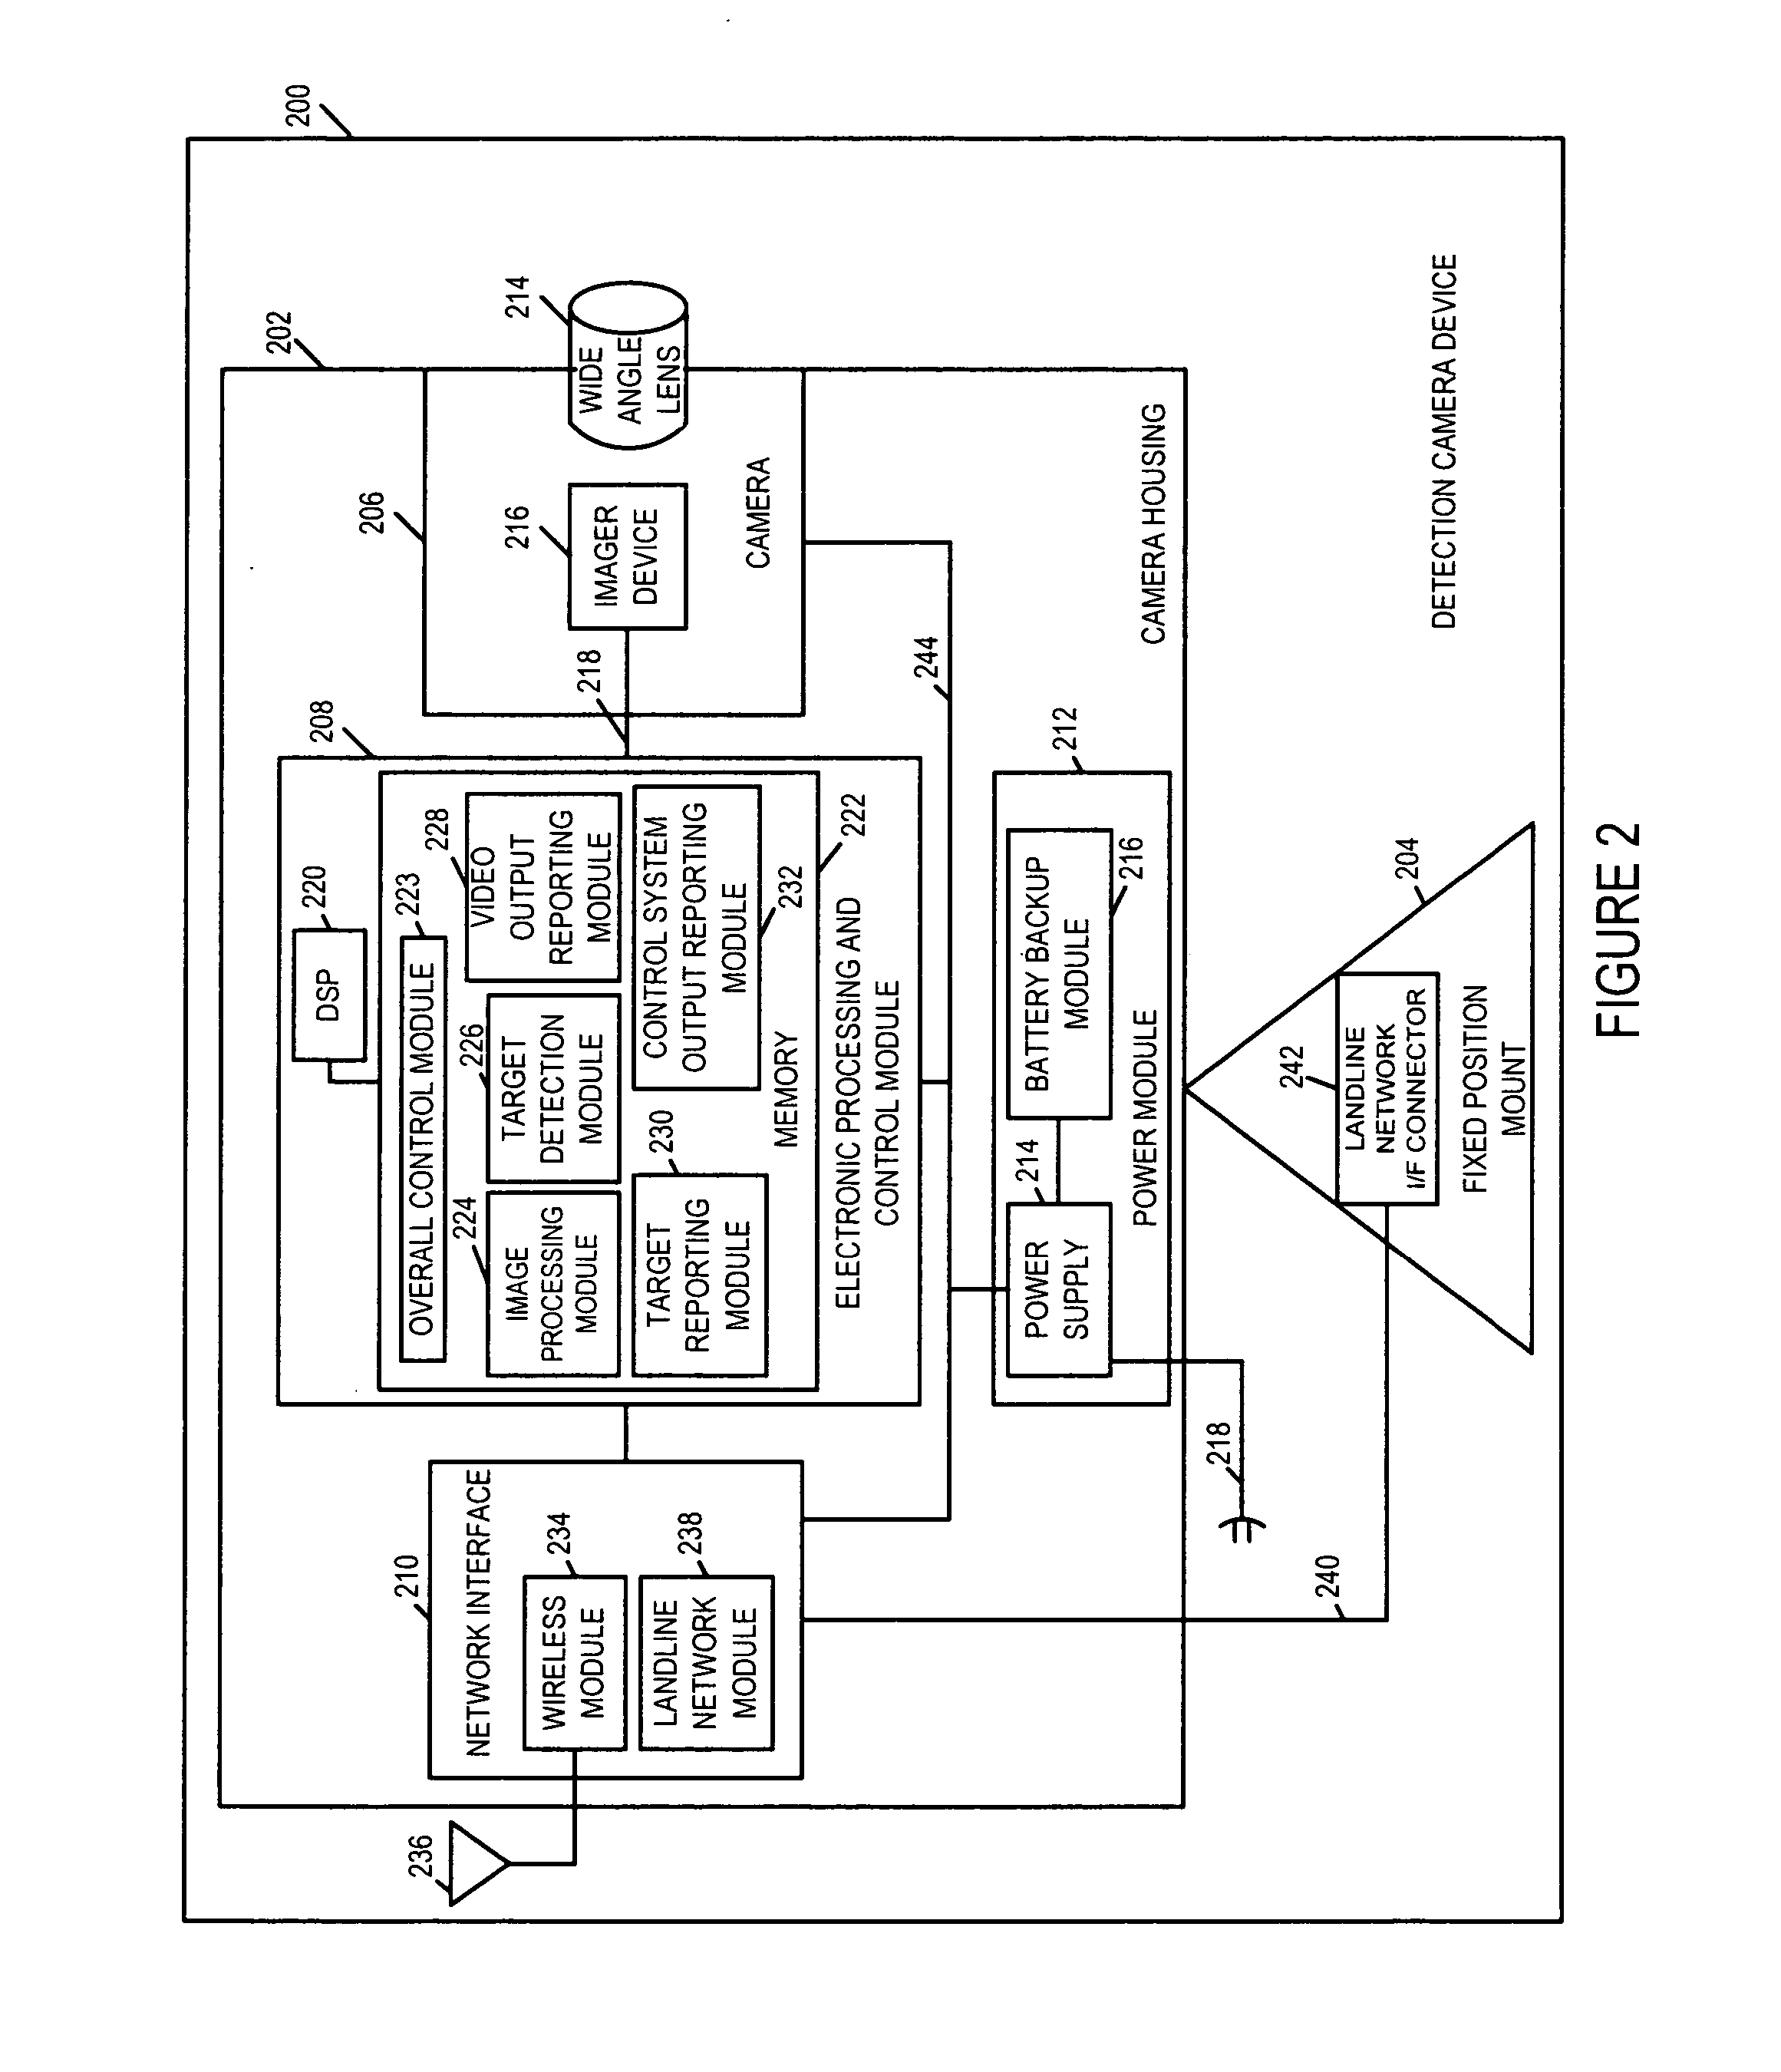 Methods and apparatus for providing fault tolerance in a surveillance system